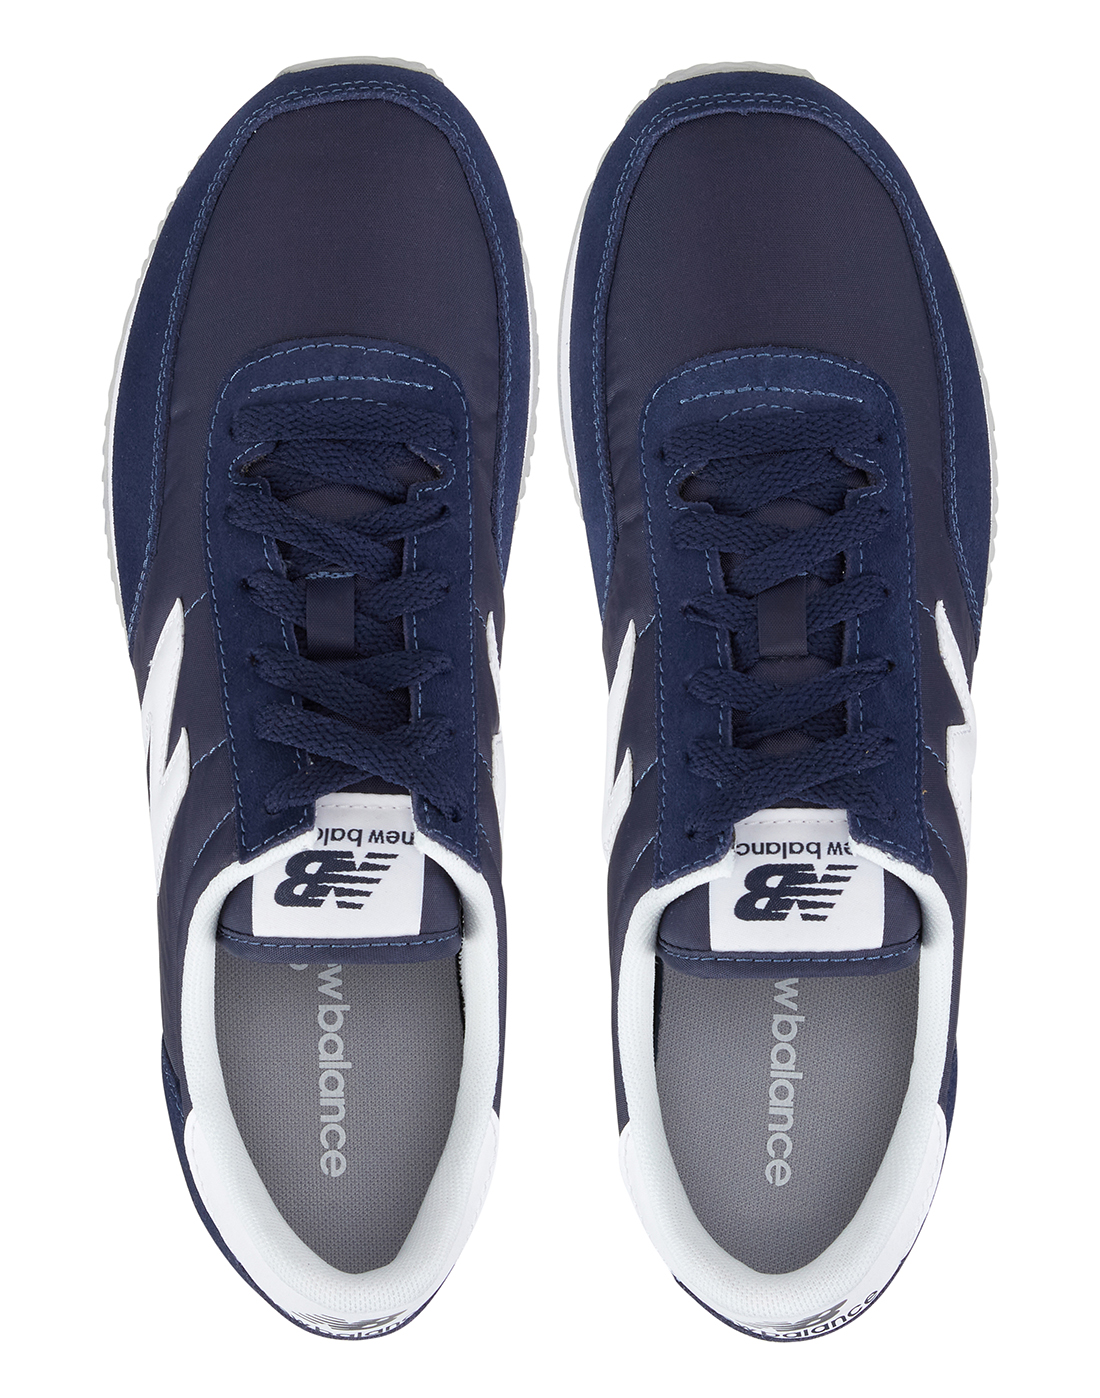 New Balance Mens 720 Trainers - Navy | Life Style Sports IE